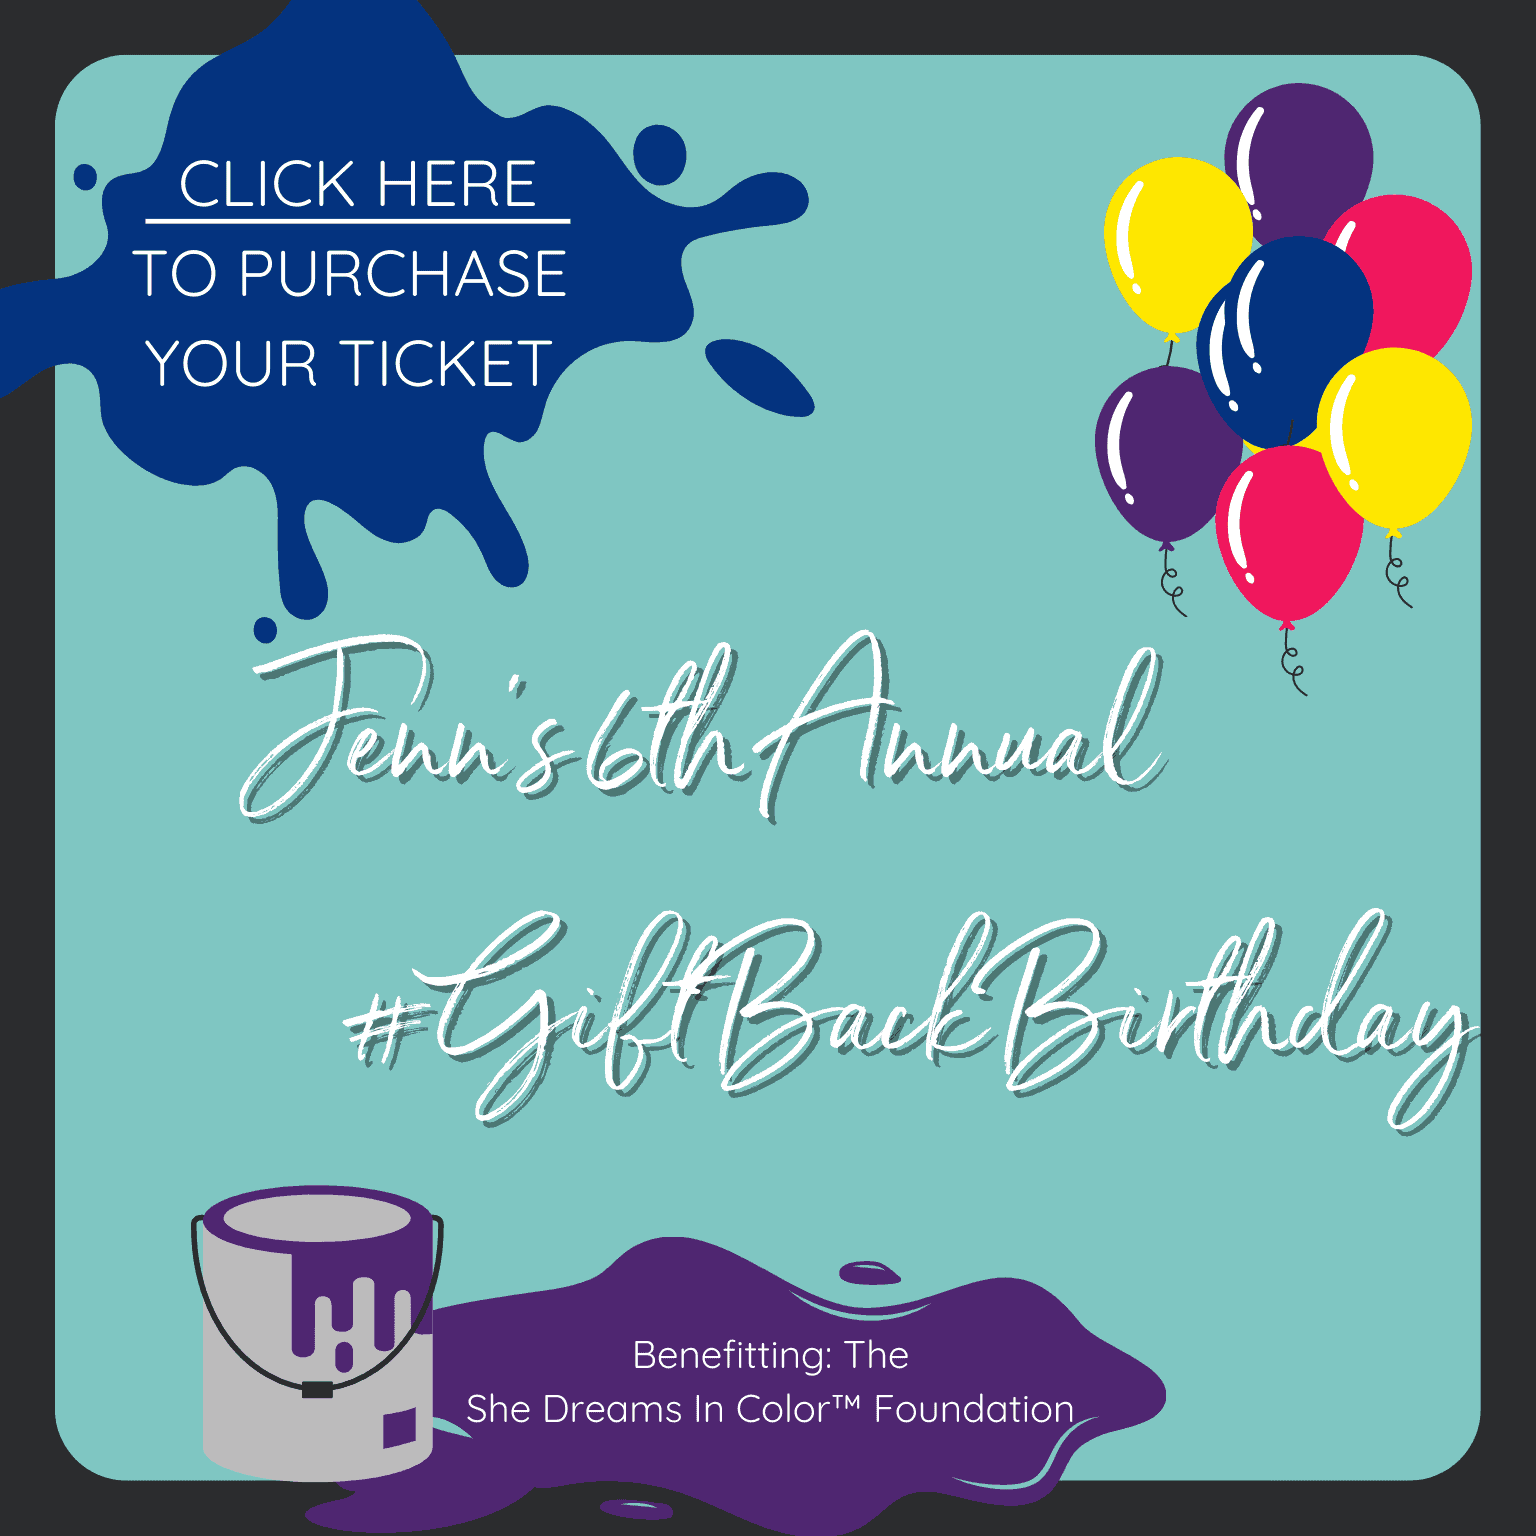 Tickets for Jenn's 6th annual #GiftBackBirthday are available. Raising funds for the She Dreams In Color Foundation. Click here to purchase.